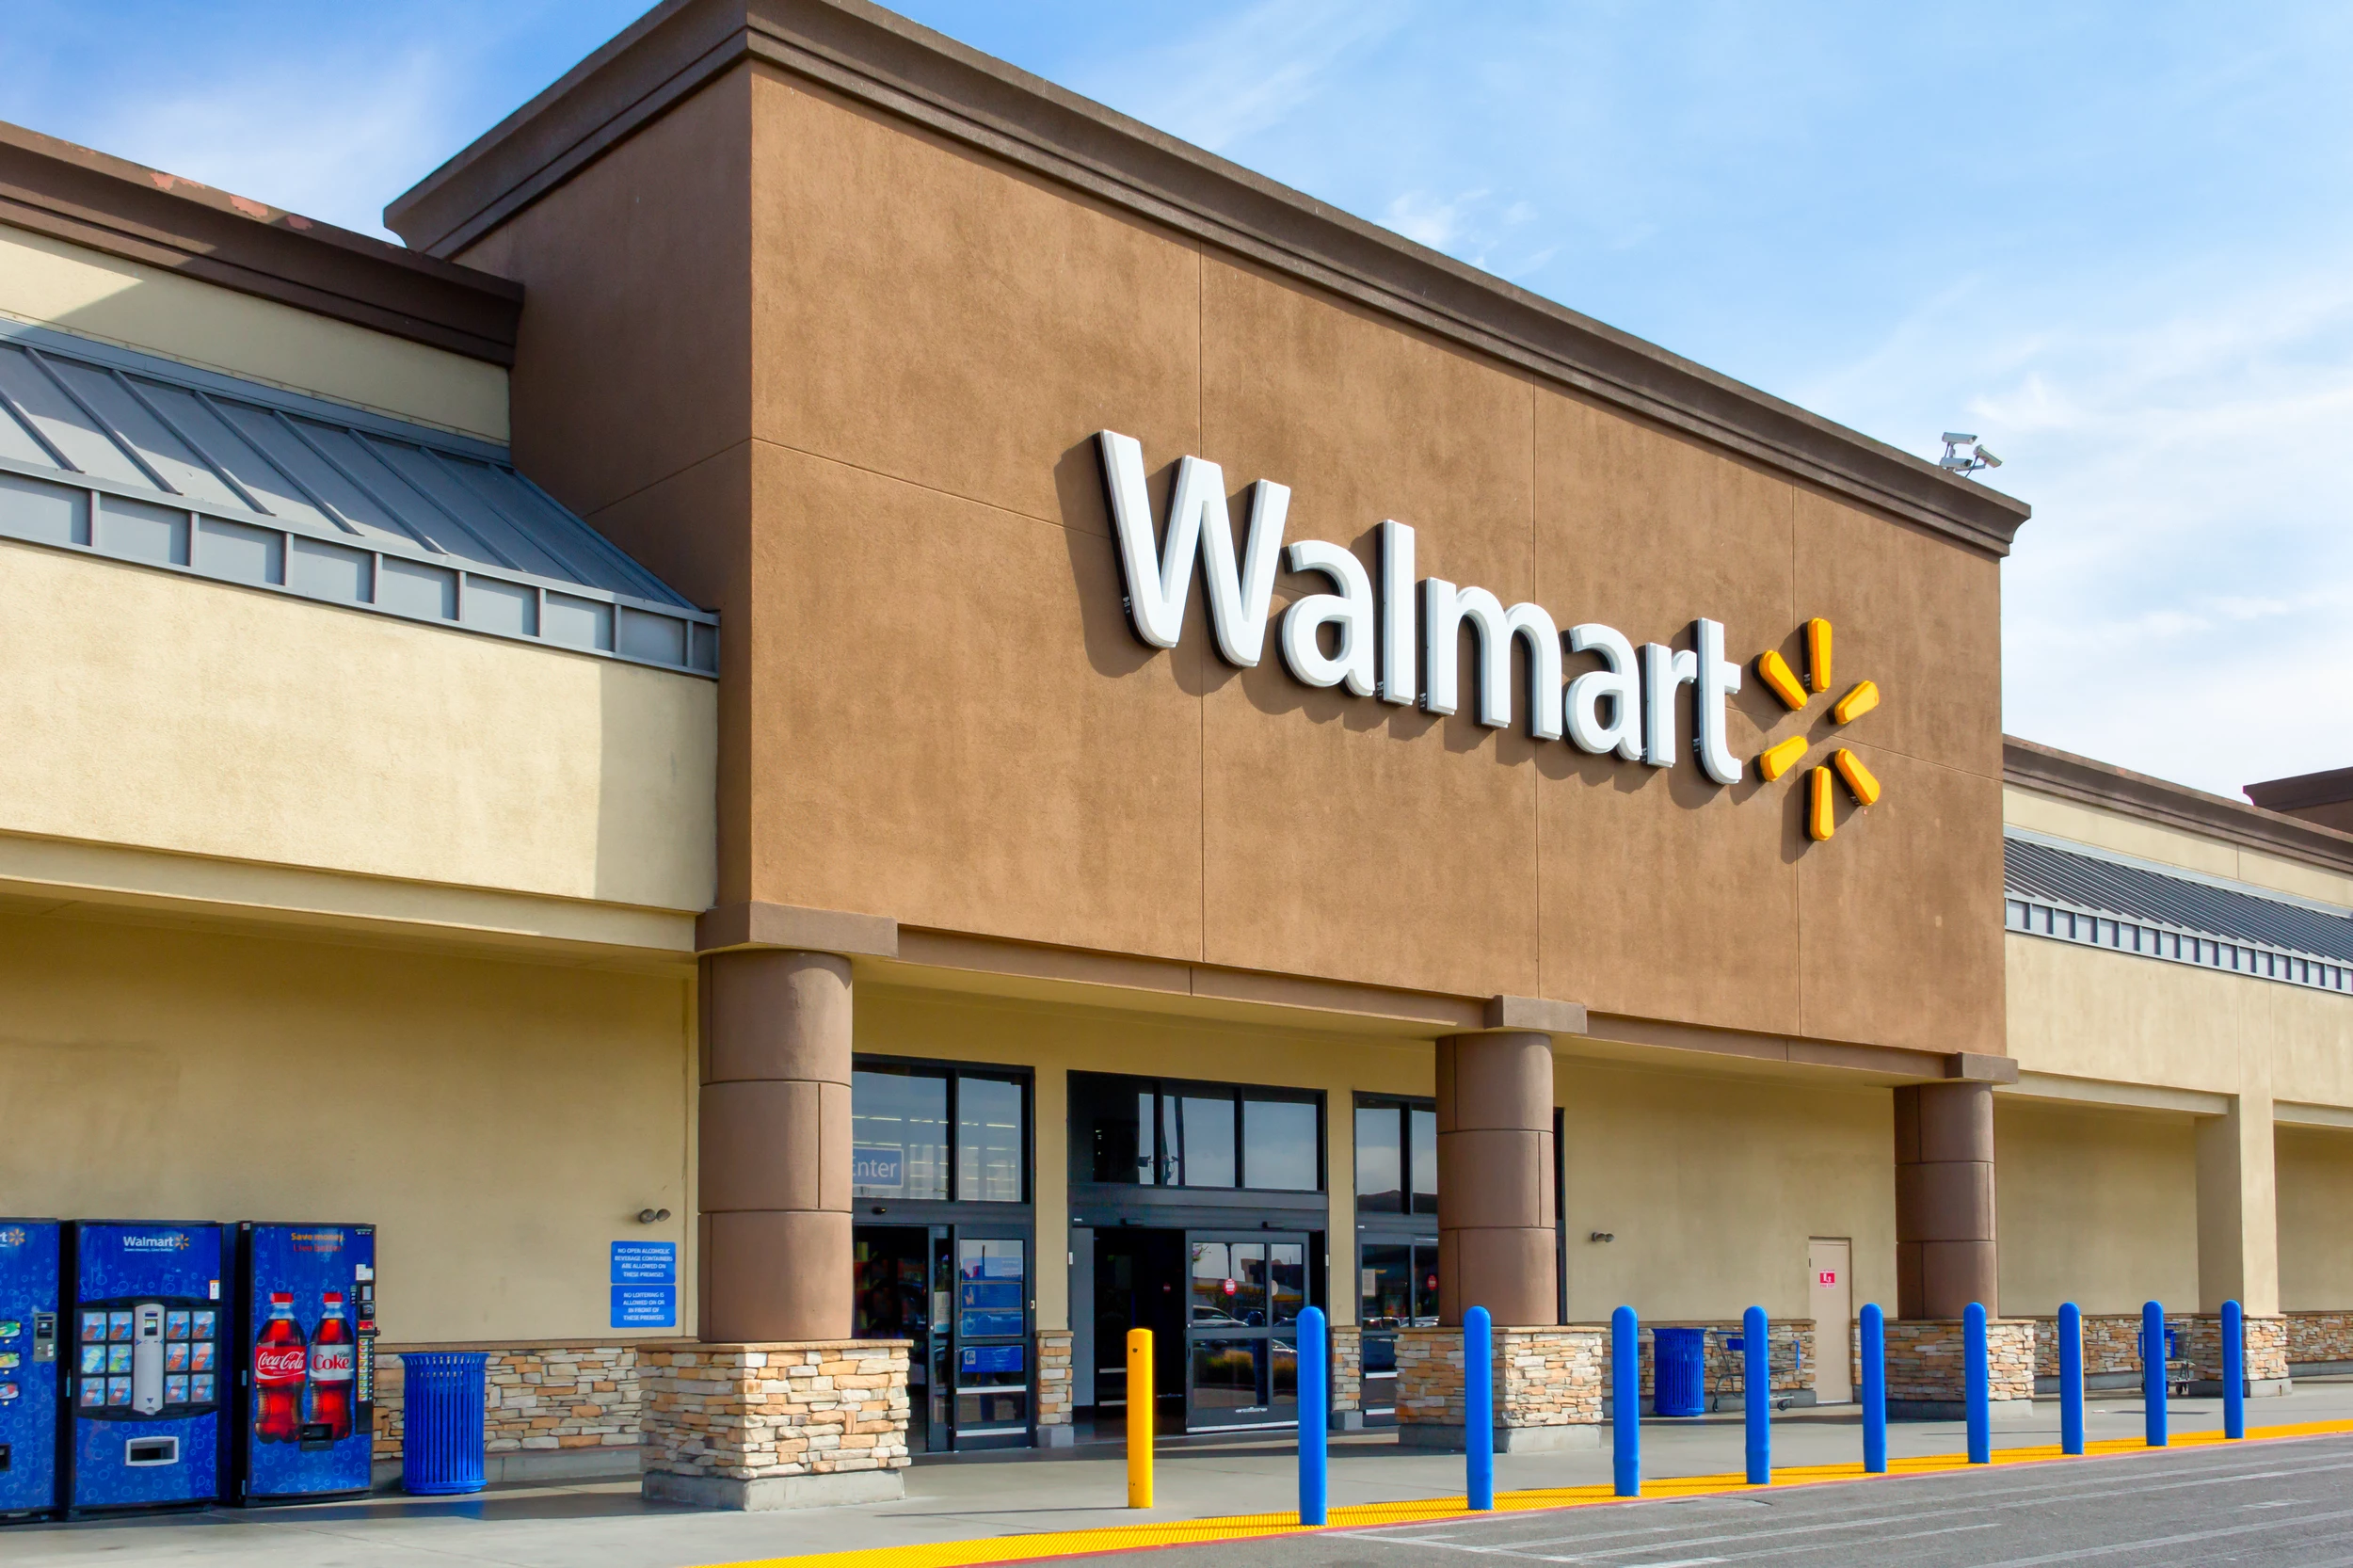 Walmart Brasil to ditch e-commerce, focus on brick and mortar